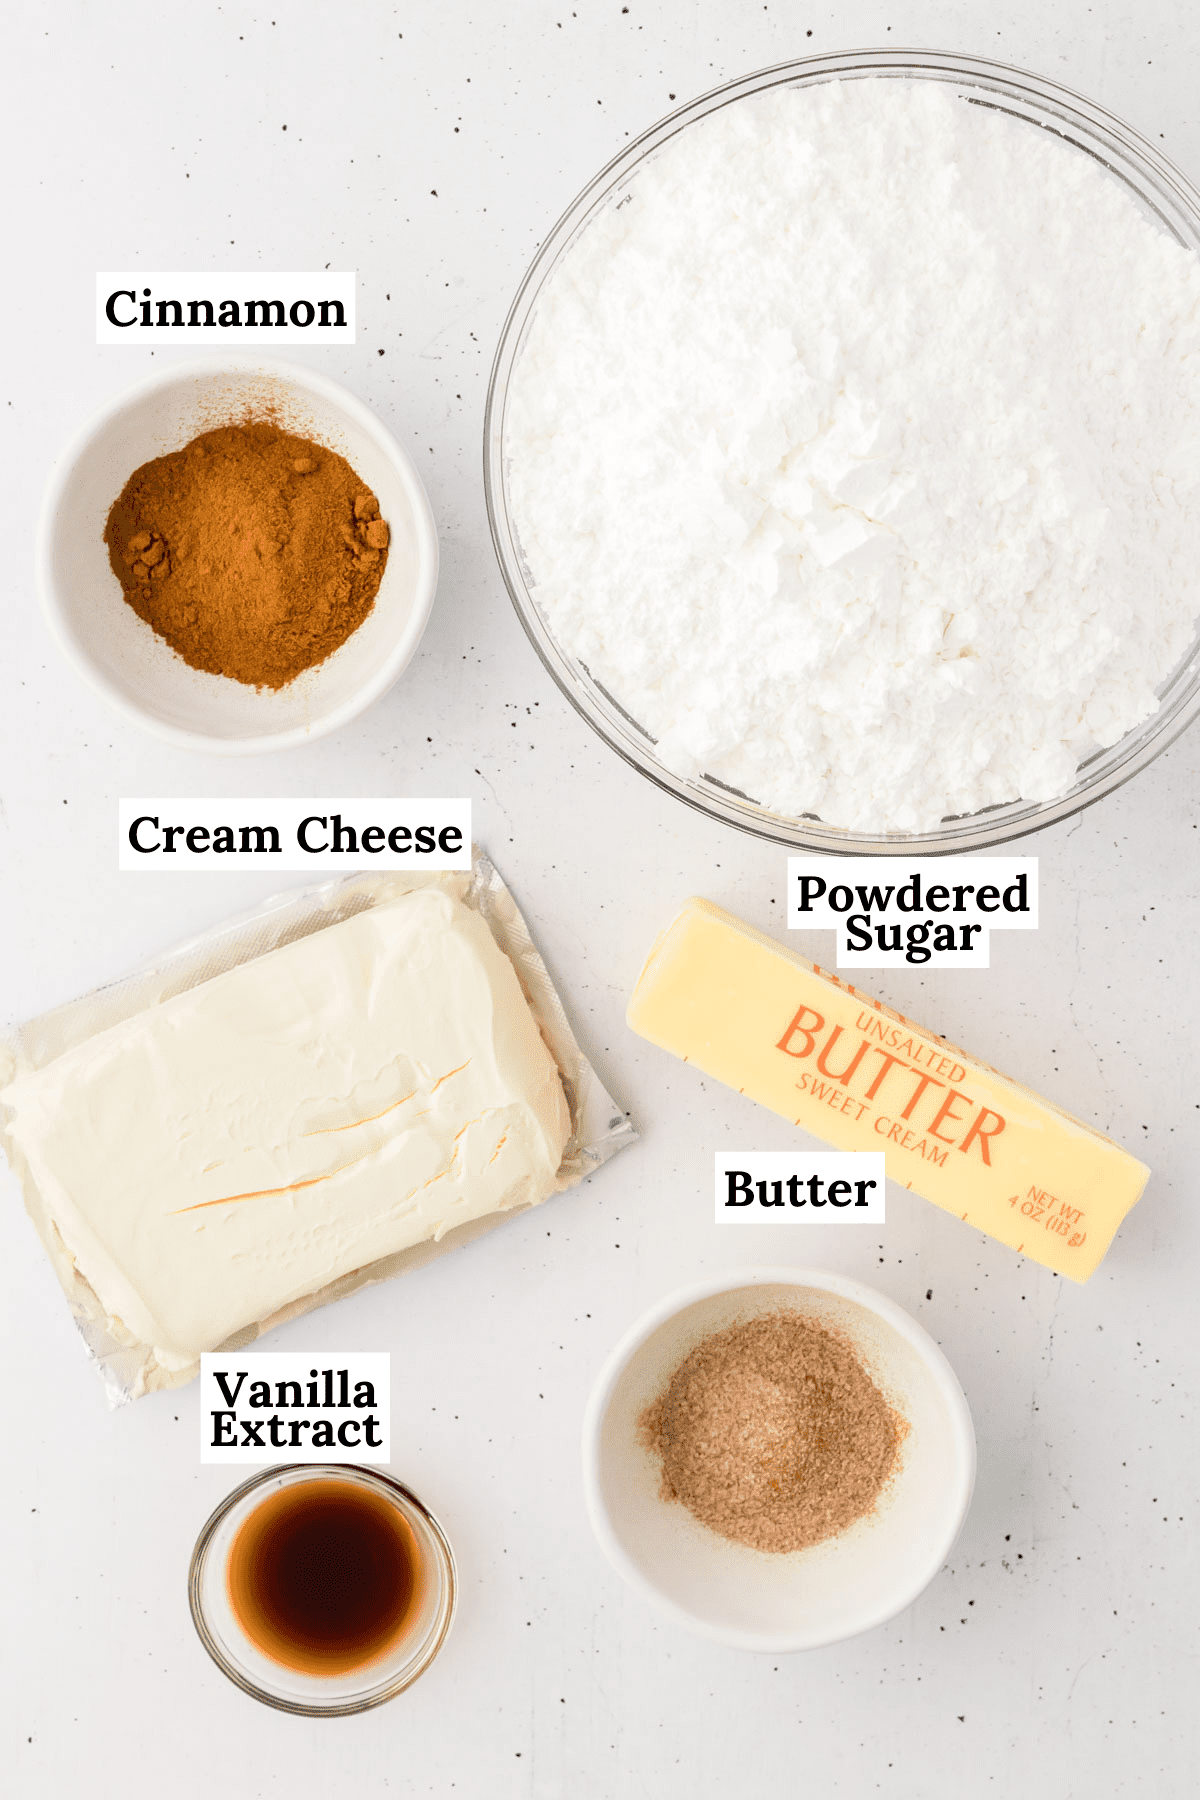 ingredients for cinnamon cream cheese frosting including cinnamon, powdered sugar, cream cheese, butter, vanilla extract and cinnamon sugar